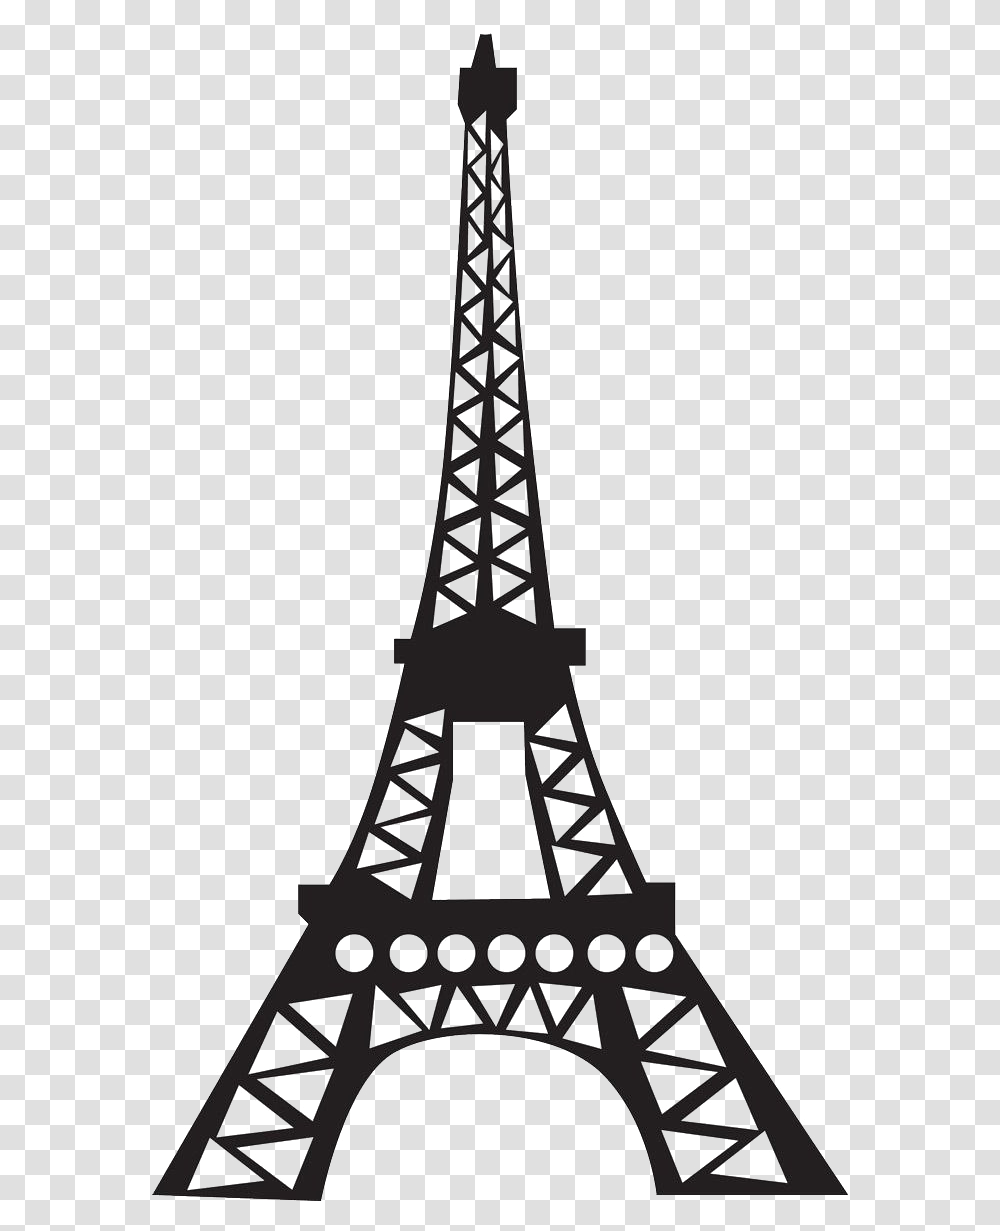 Eiffel Tower Silhouette High Quality Image Urkiola Natural Park, Architecture, Building, Spire, Steeple Transparent Png